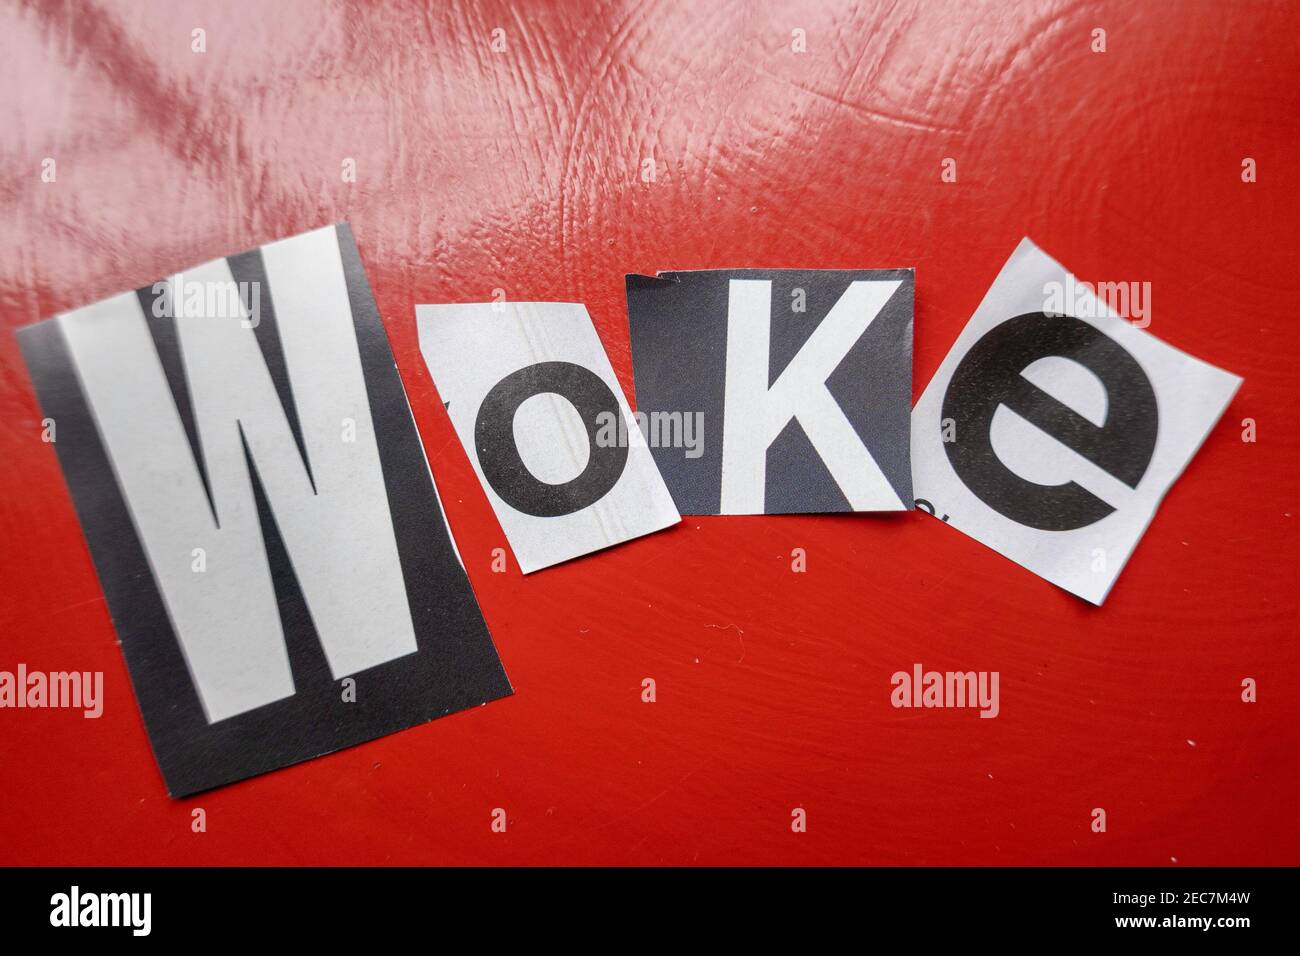 The word 'WOKE' using cut-out paper letters in the ransom note effect typography Stock Photo